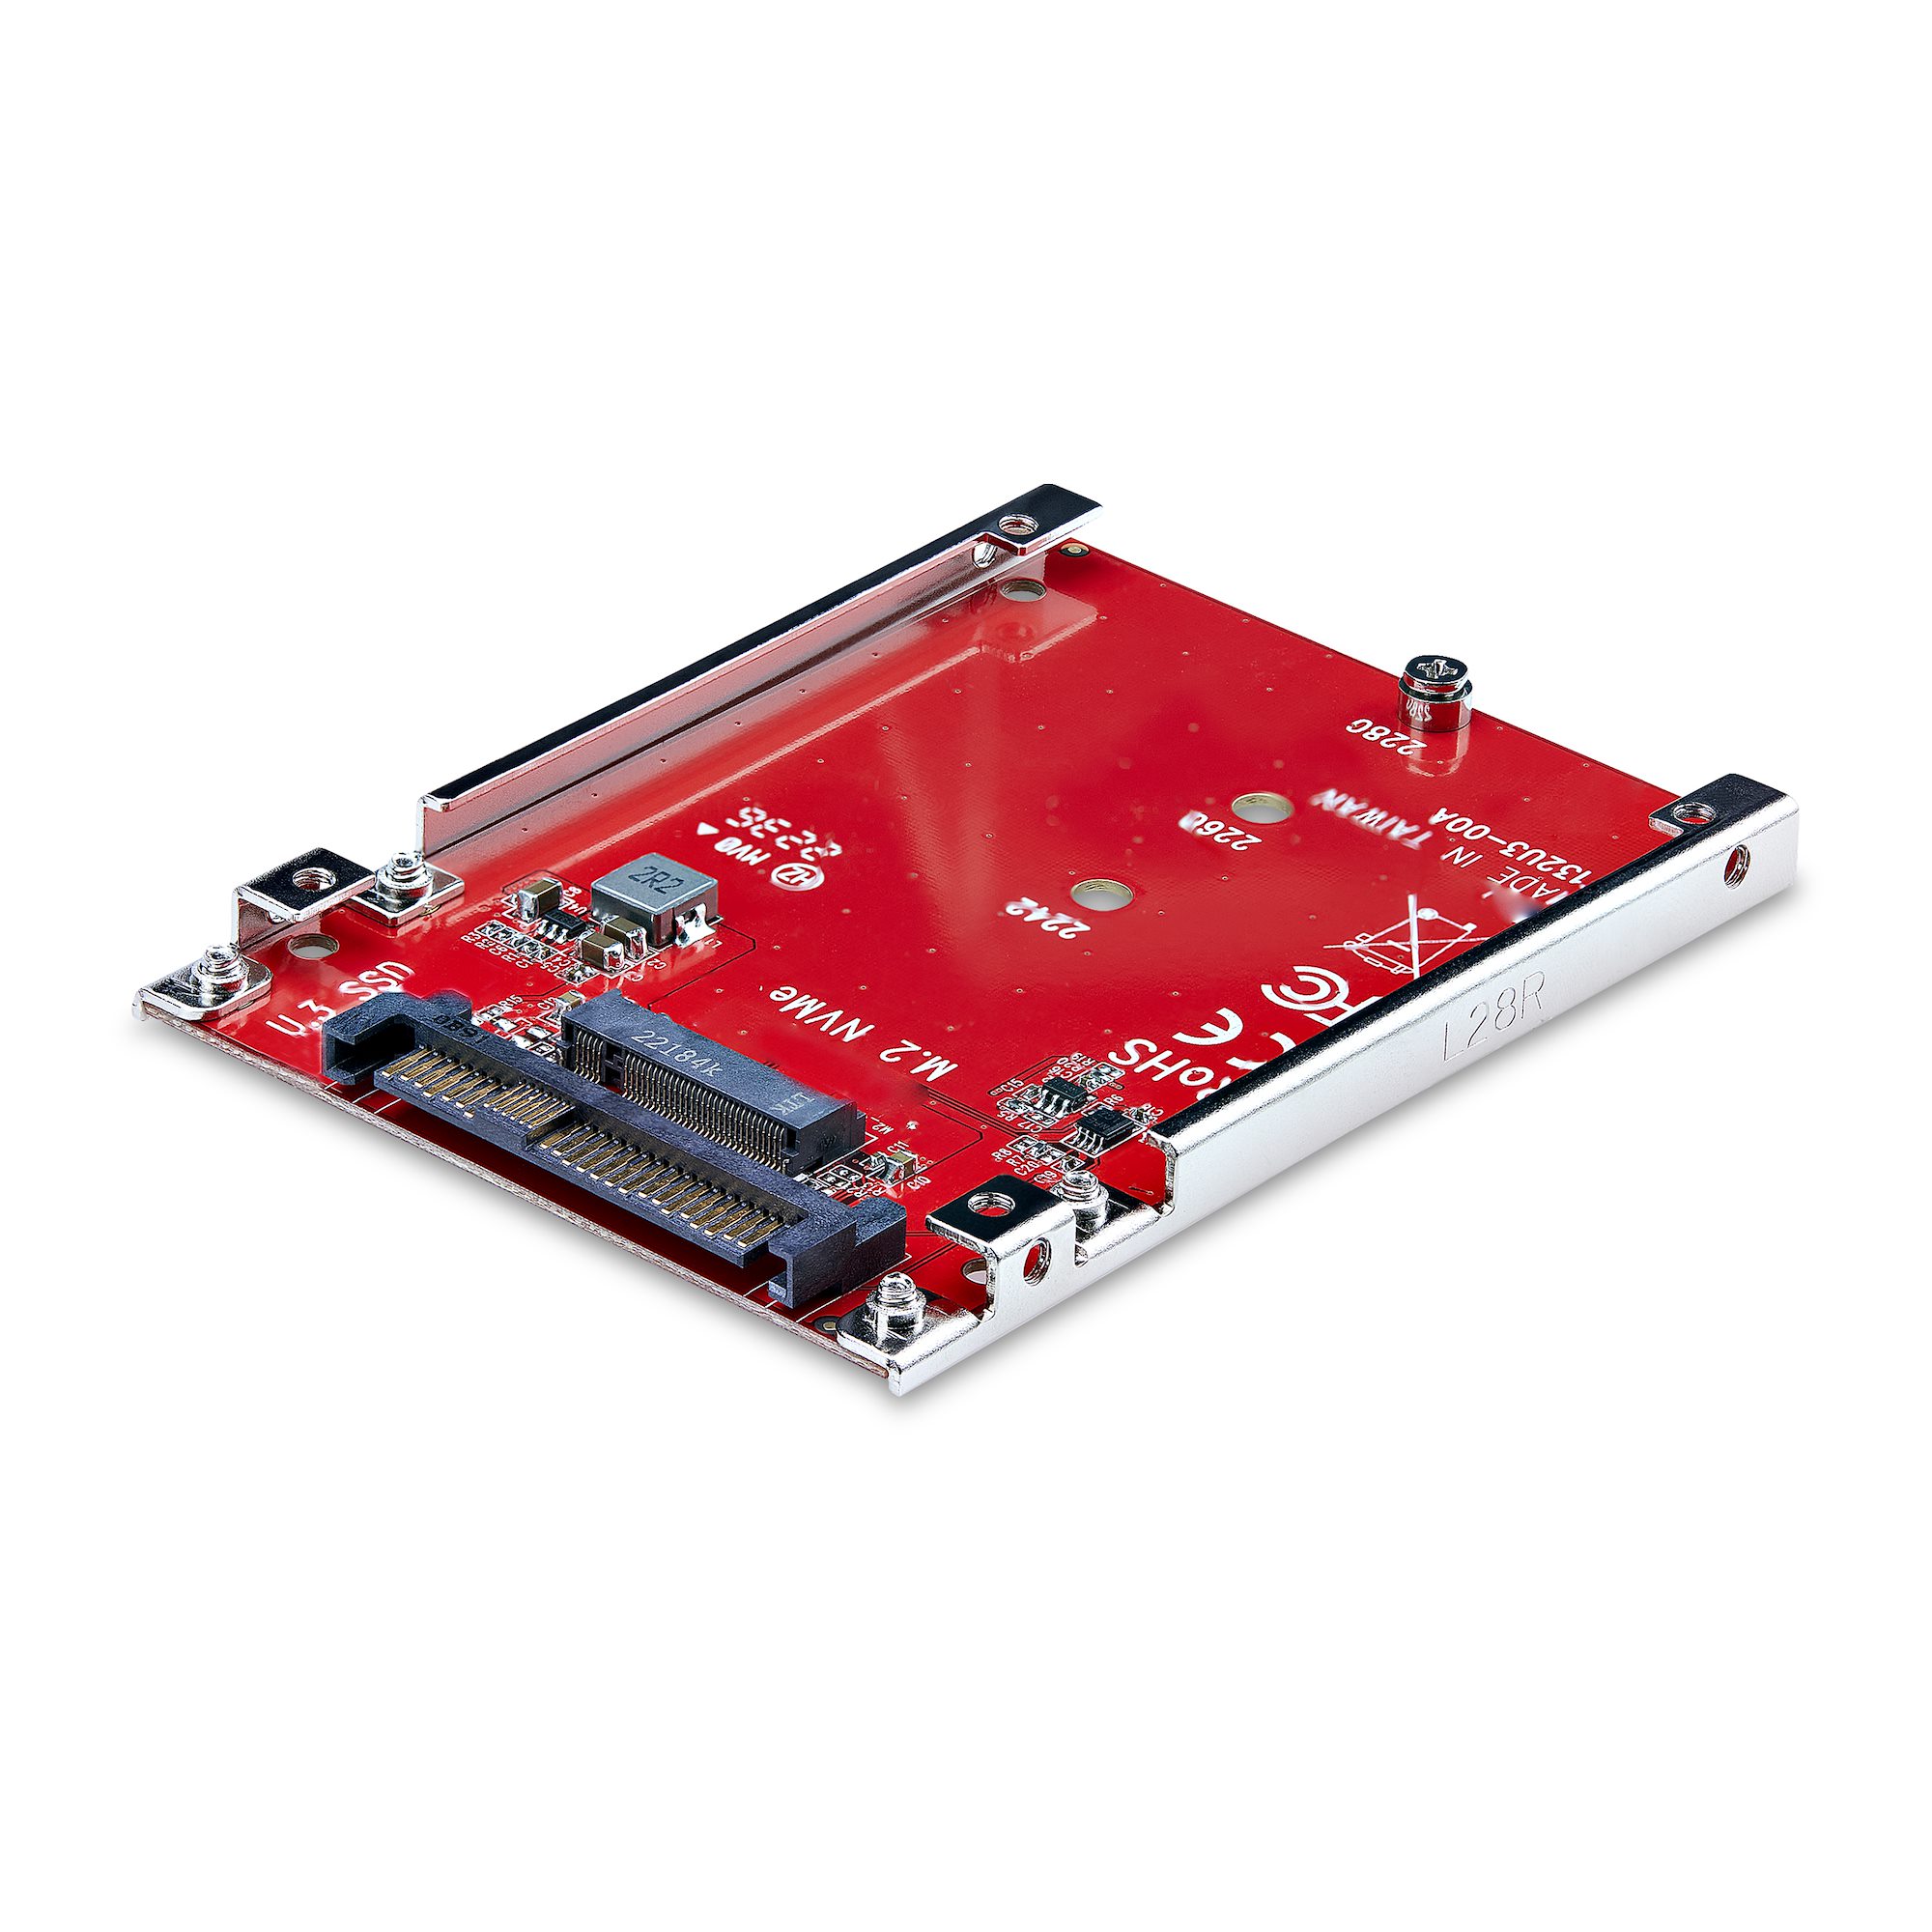 StarTech.com M.2 SATA NGFF SSD to 2.5in SATA Adapter Converter